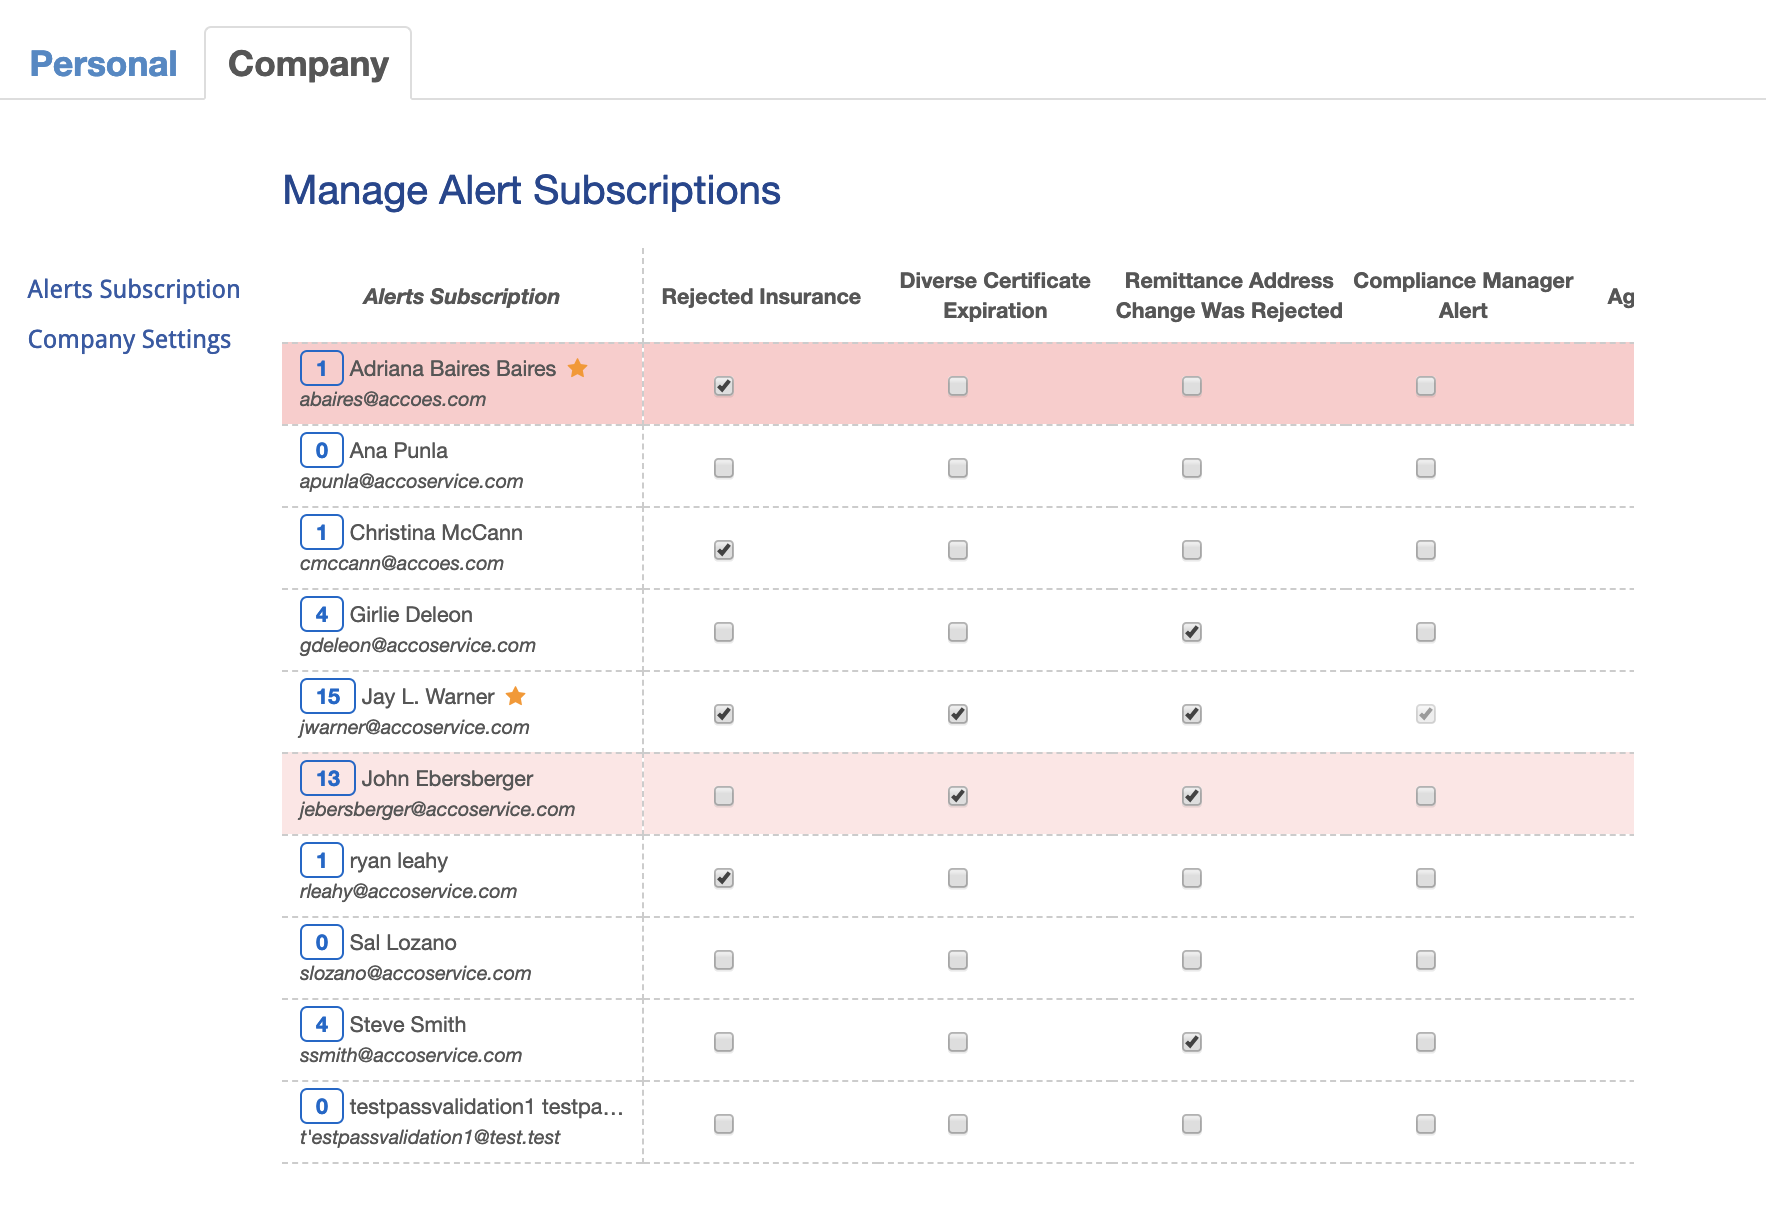 Manage Alert Subscriptions